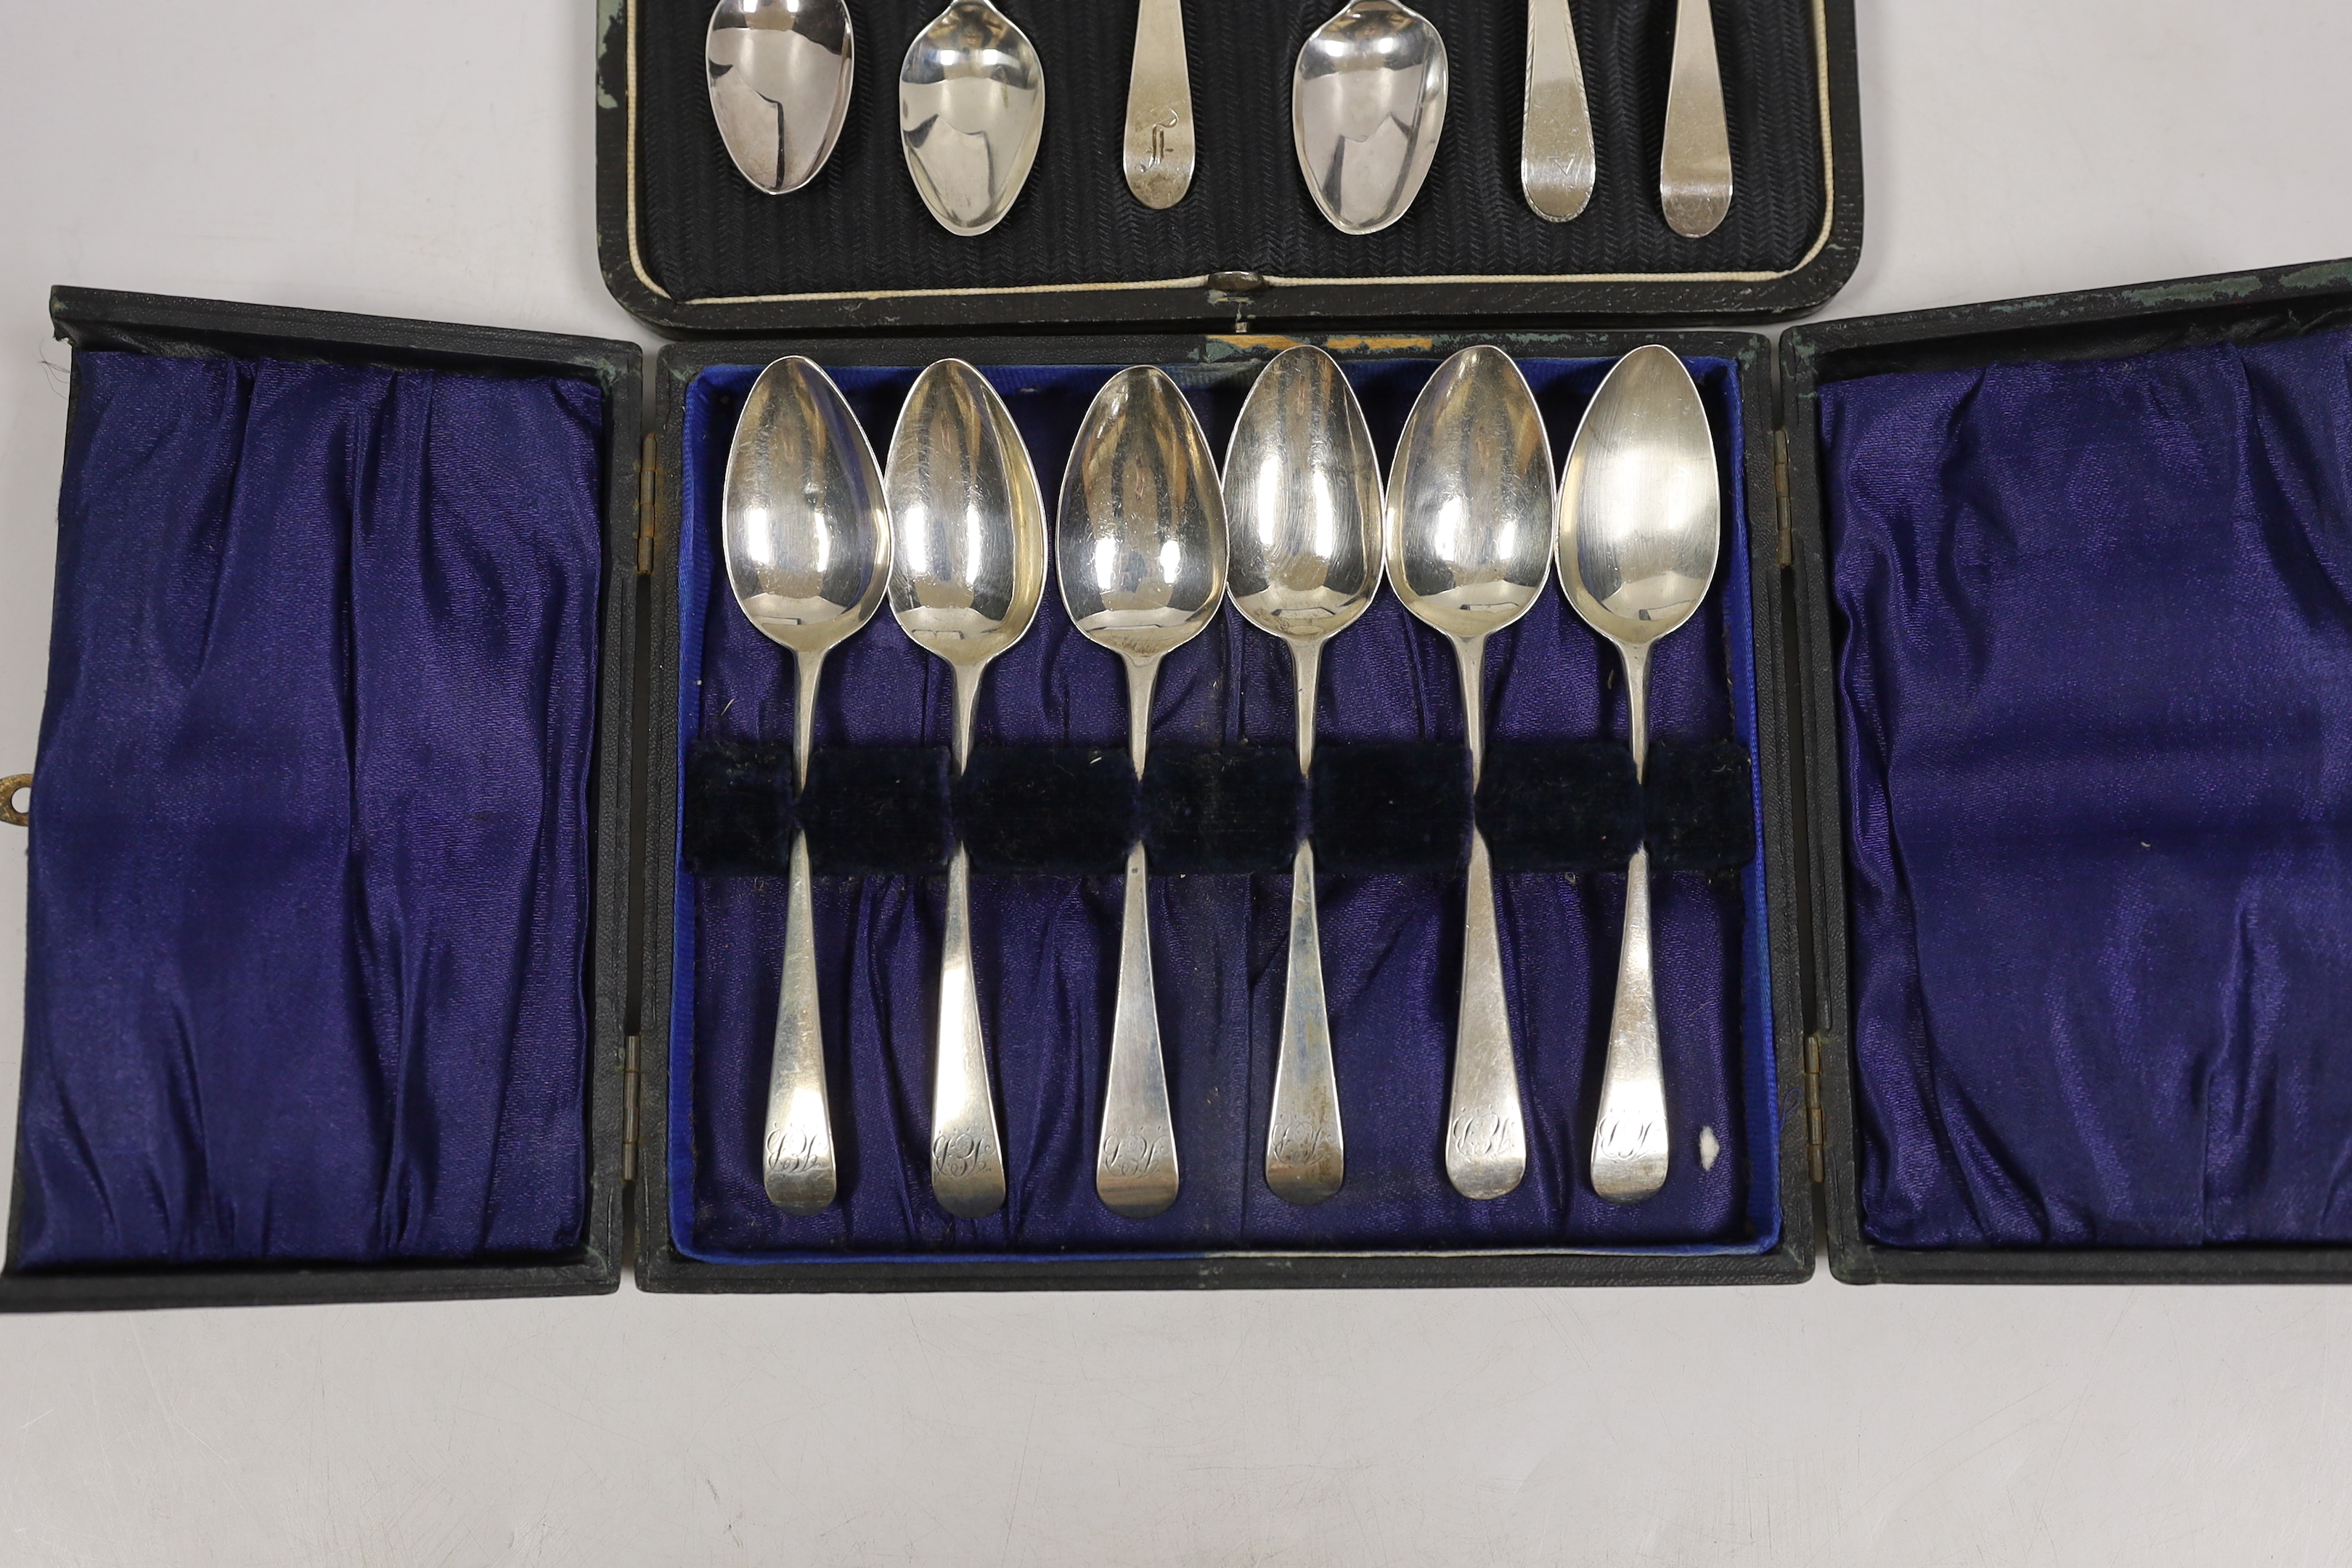 Six George III silver teaspoons by Hester Bateman, all different except one pair, London, 1787, together with a cased set of six George III silver Old English pattern teaspoons by Peter & William Bateman, London, 1813.